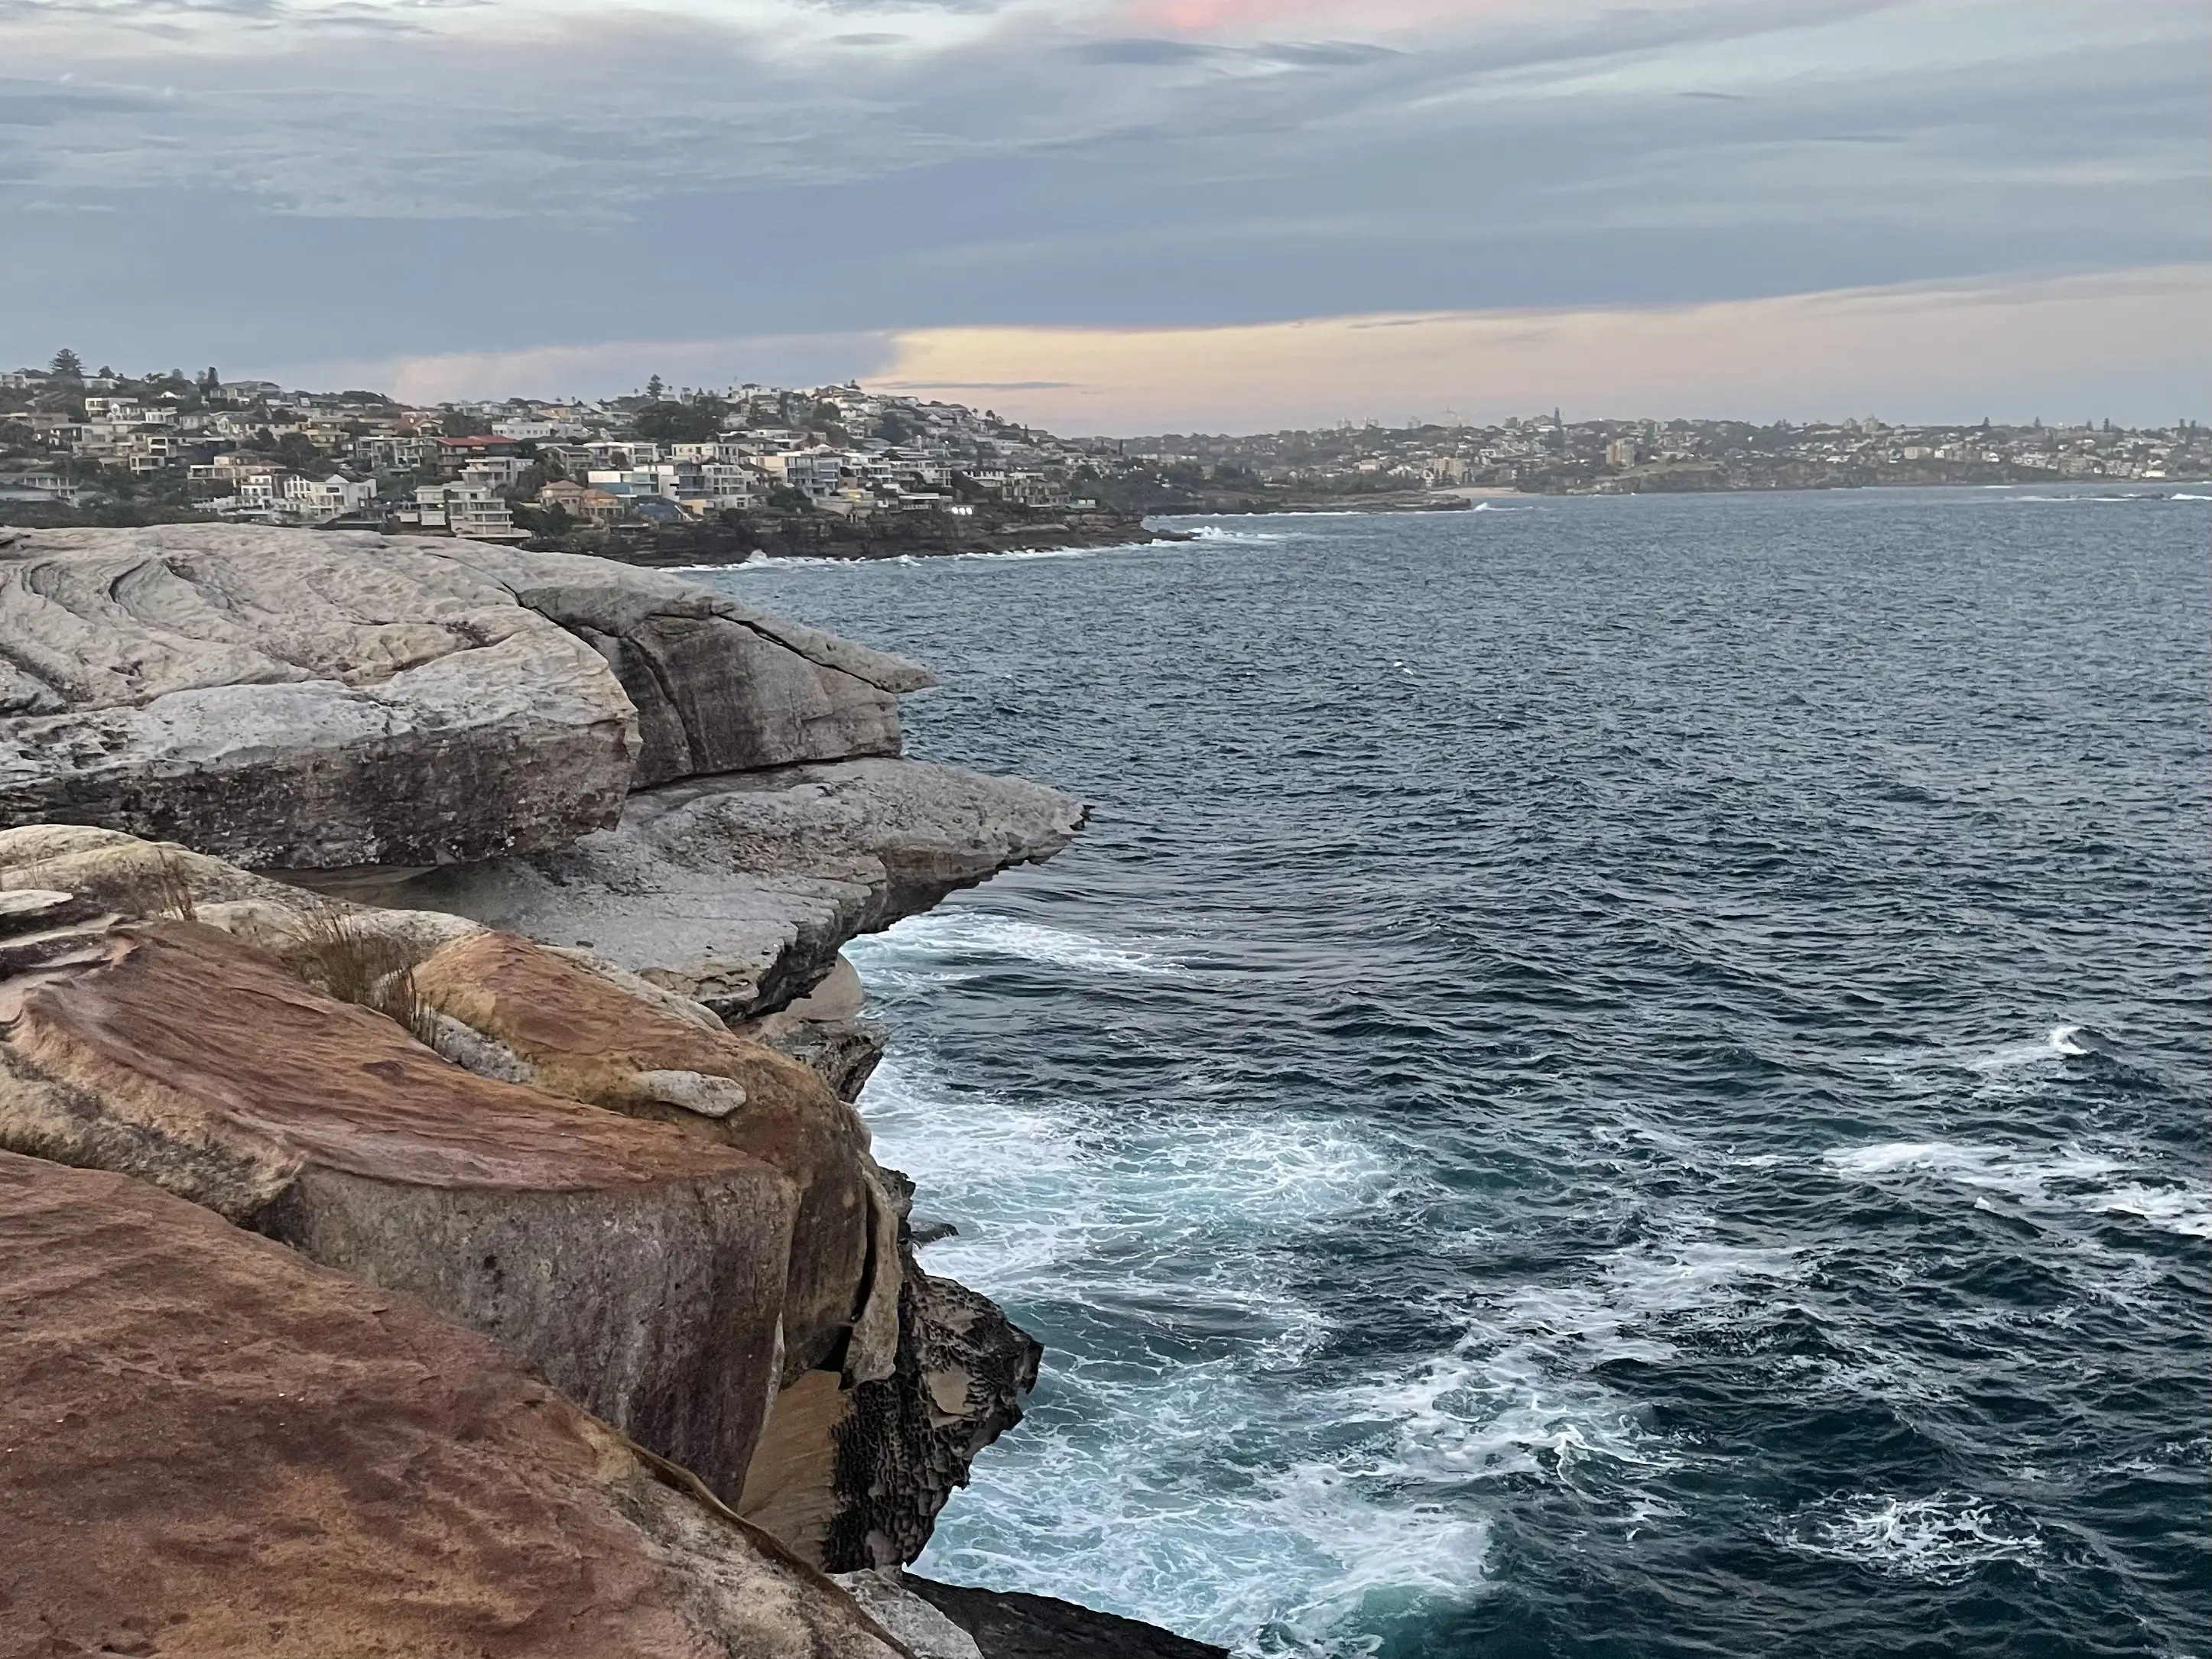 Marine Parade Lookout in Sydney, with mesmerizing Ocean, City and Cliff Views